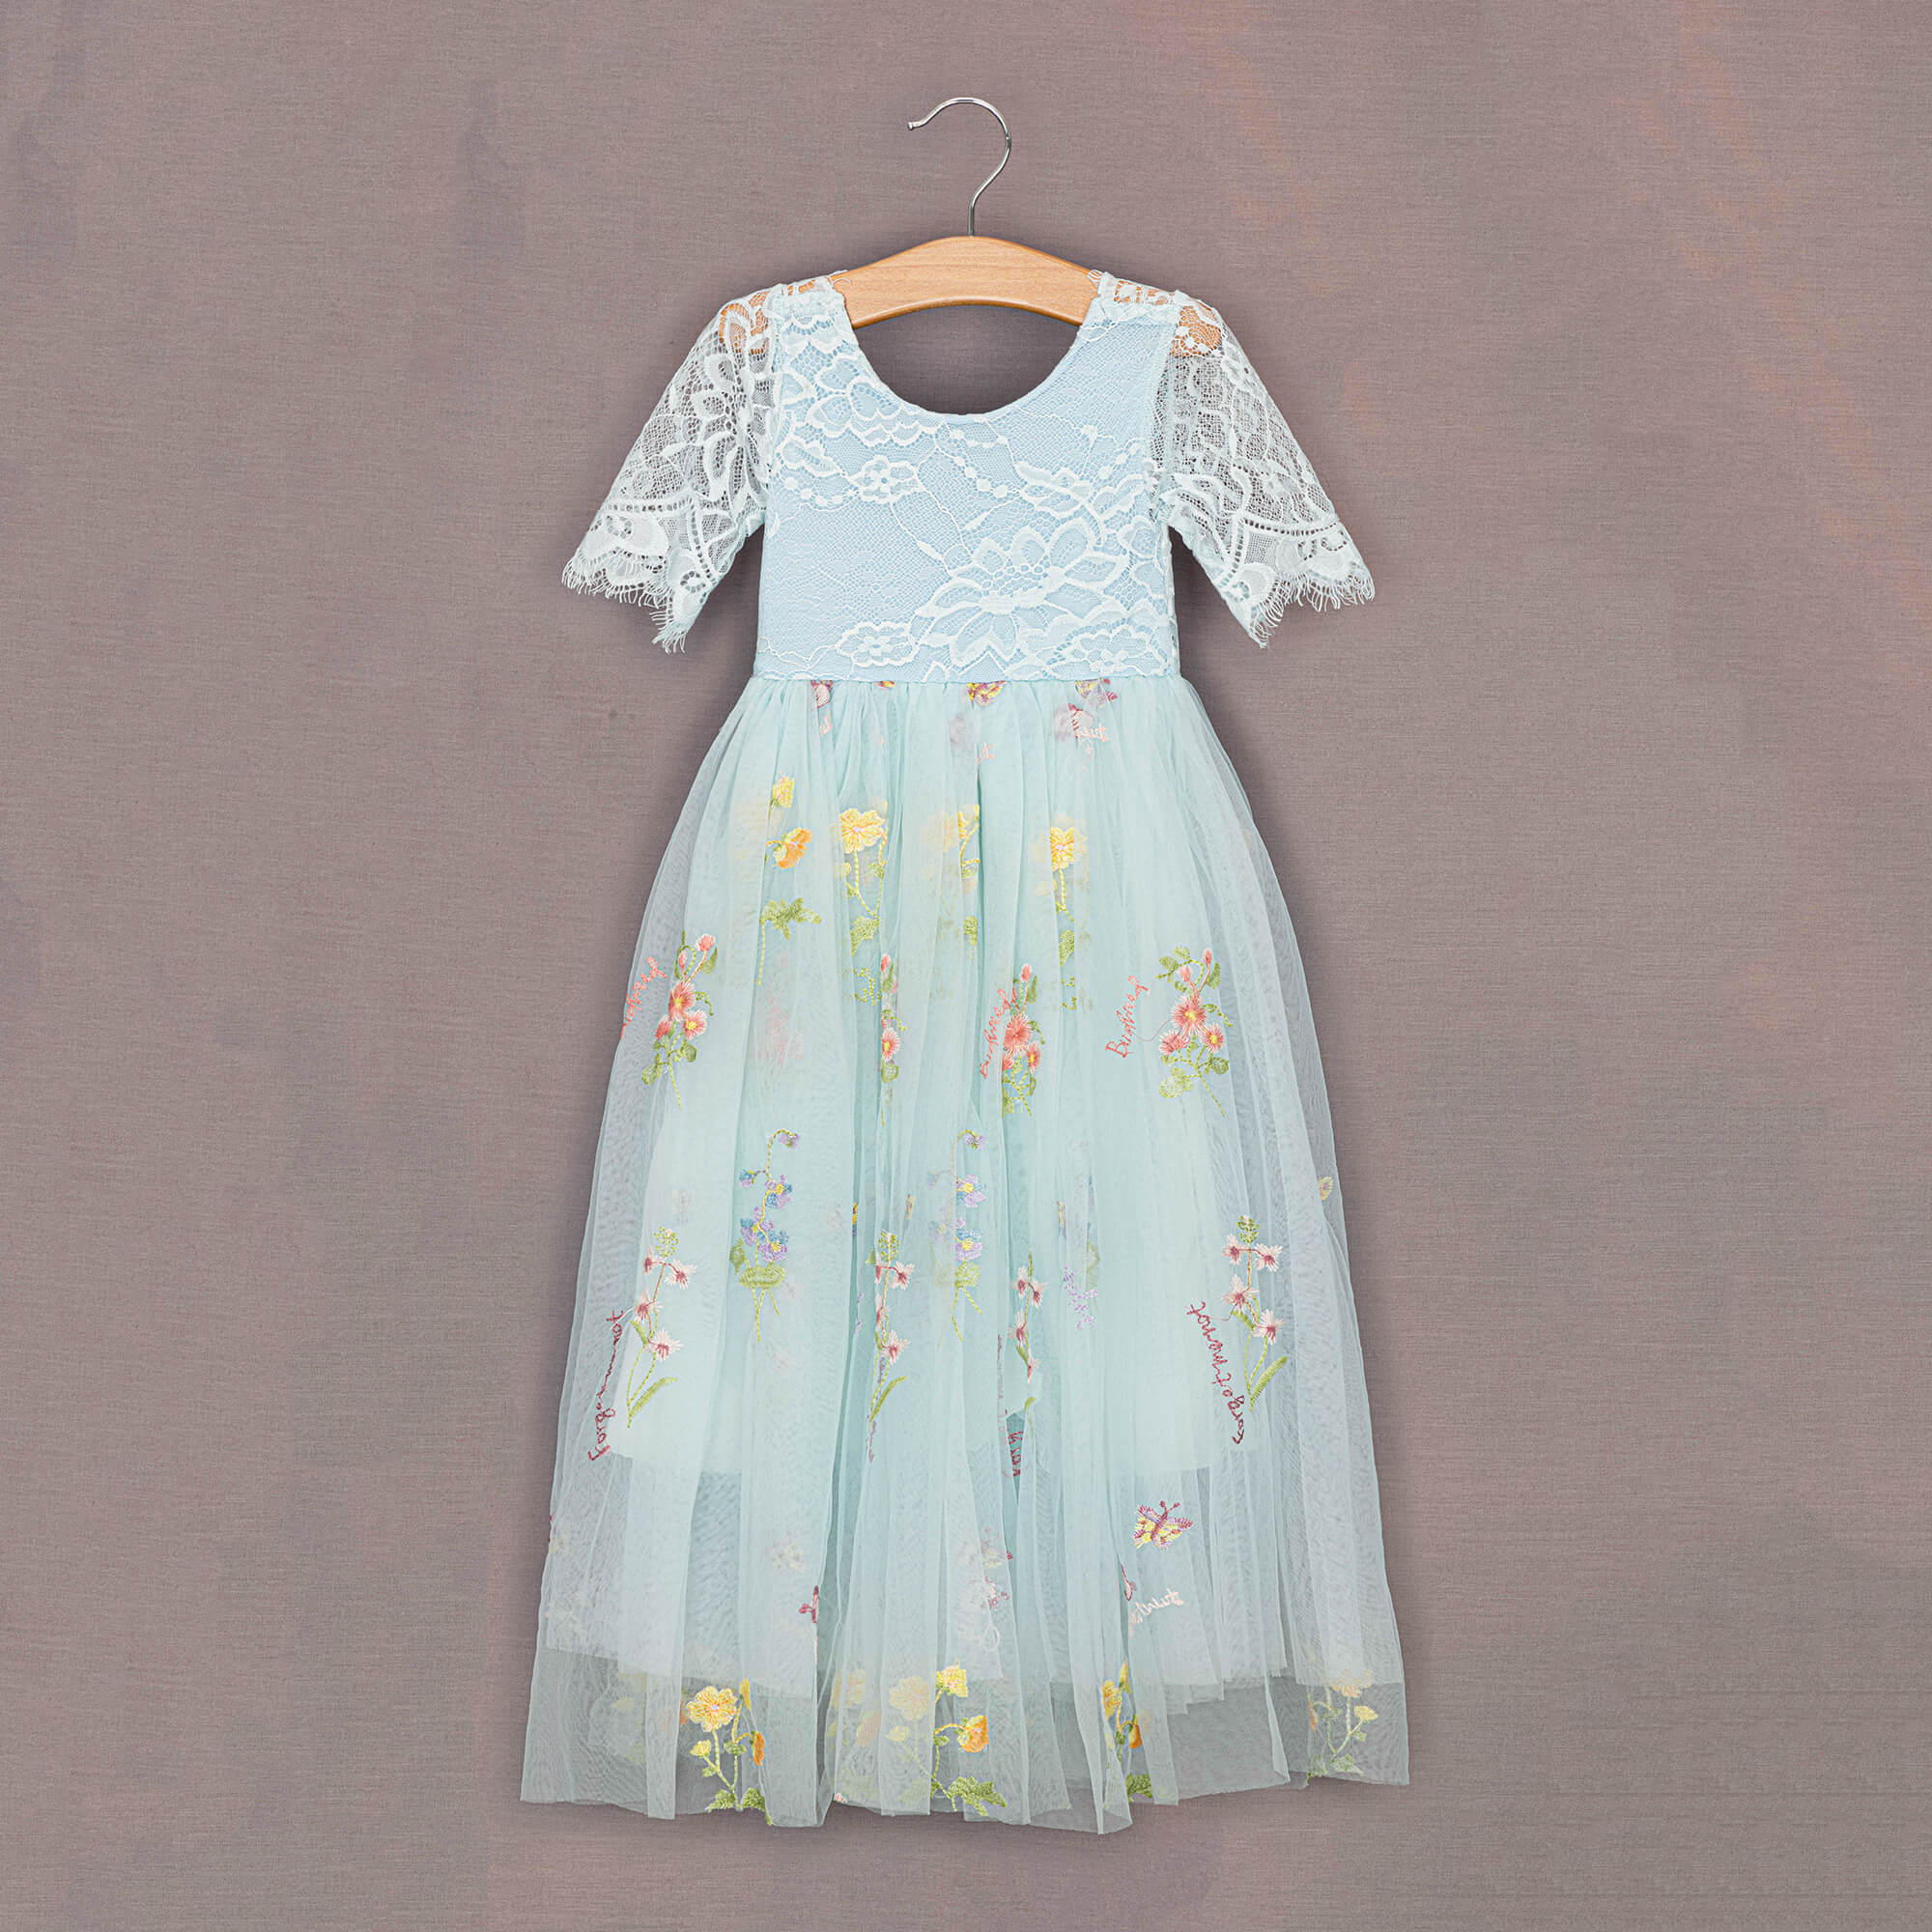 Front of Enchanted Dress on hanger